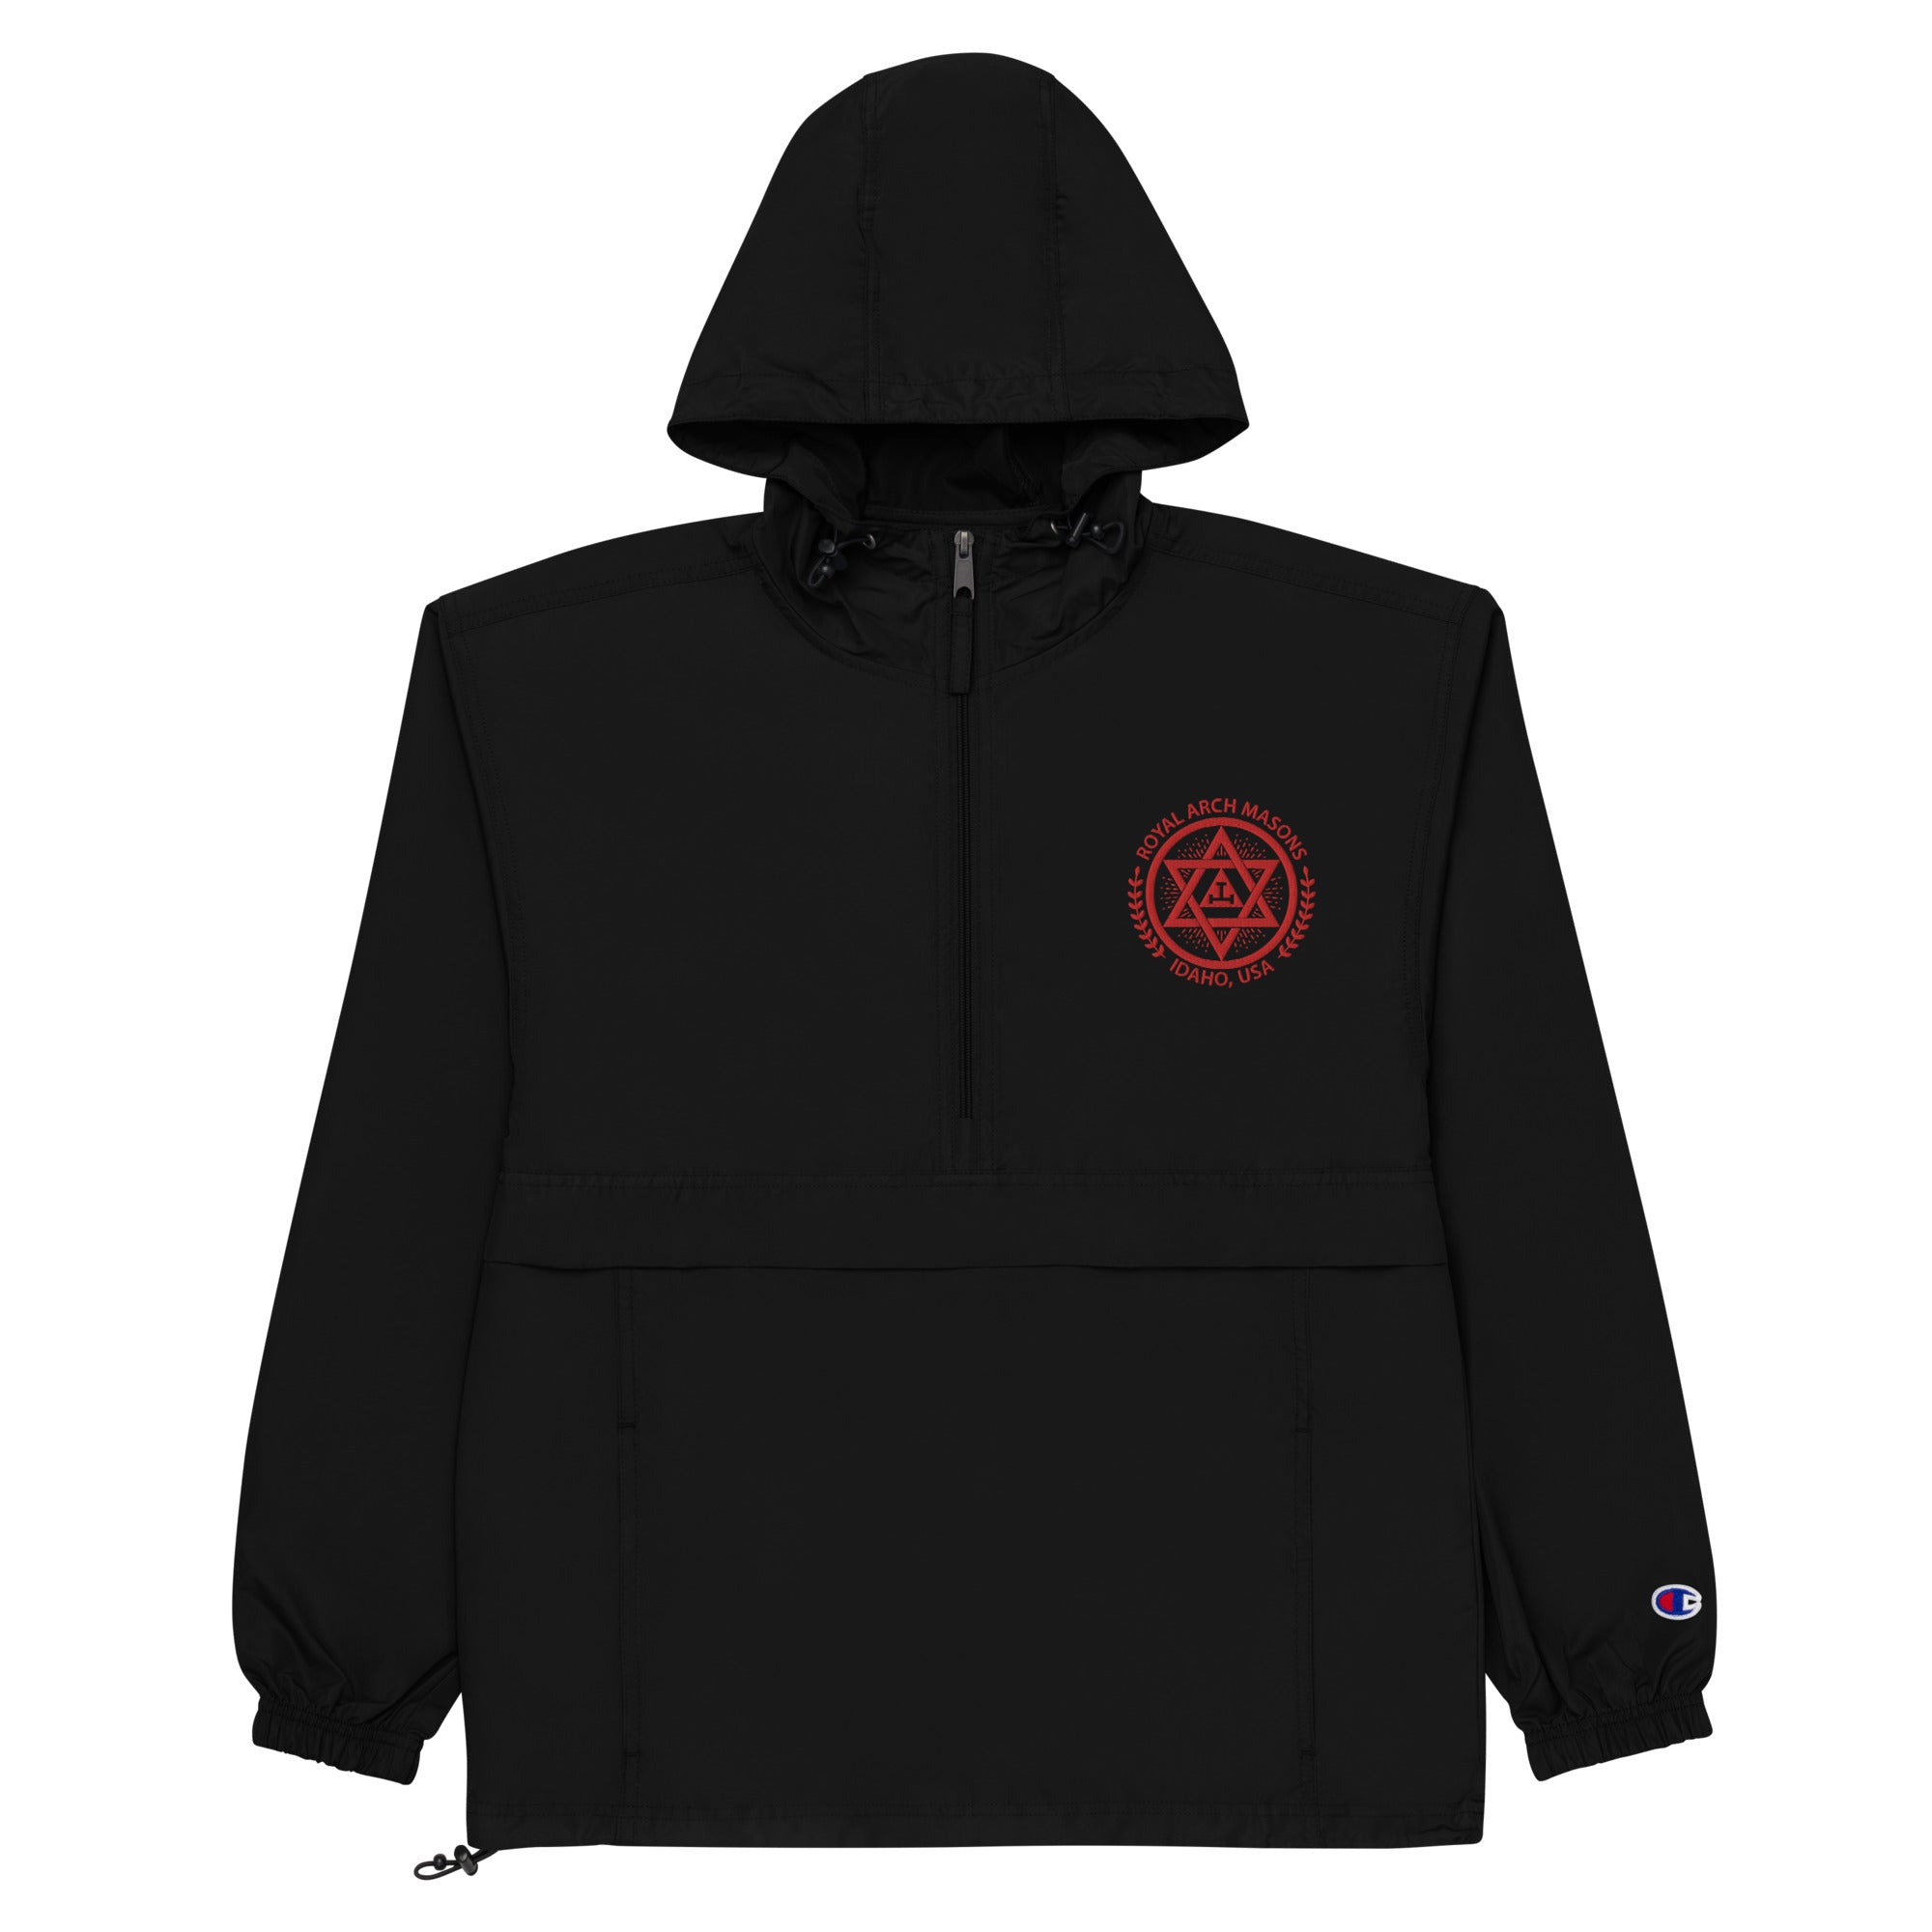 Royal Arch No. 5 Custom Embroidered Champion Packable Windbreaker